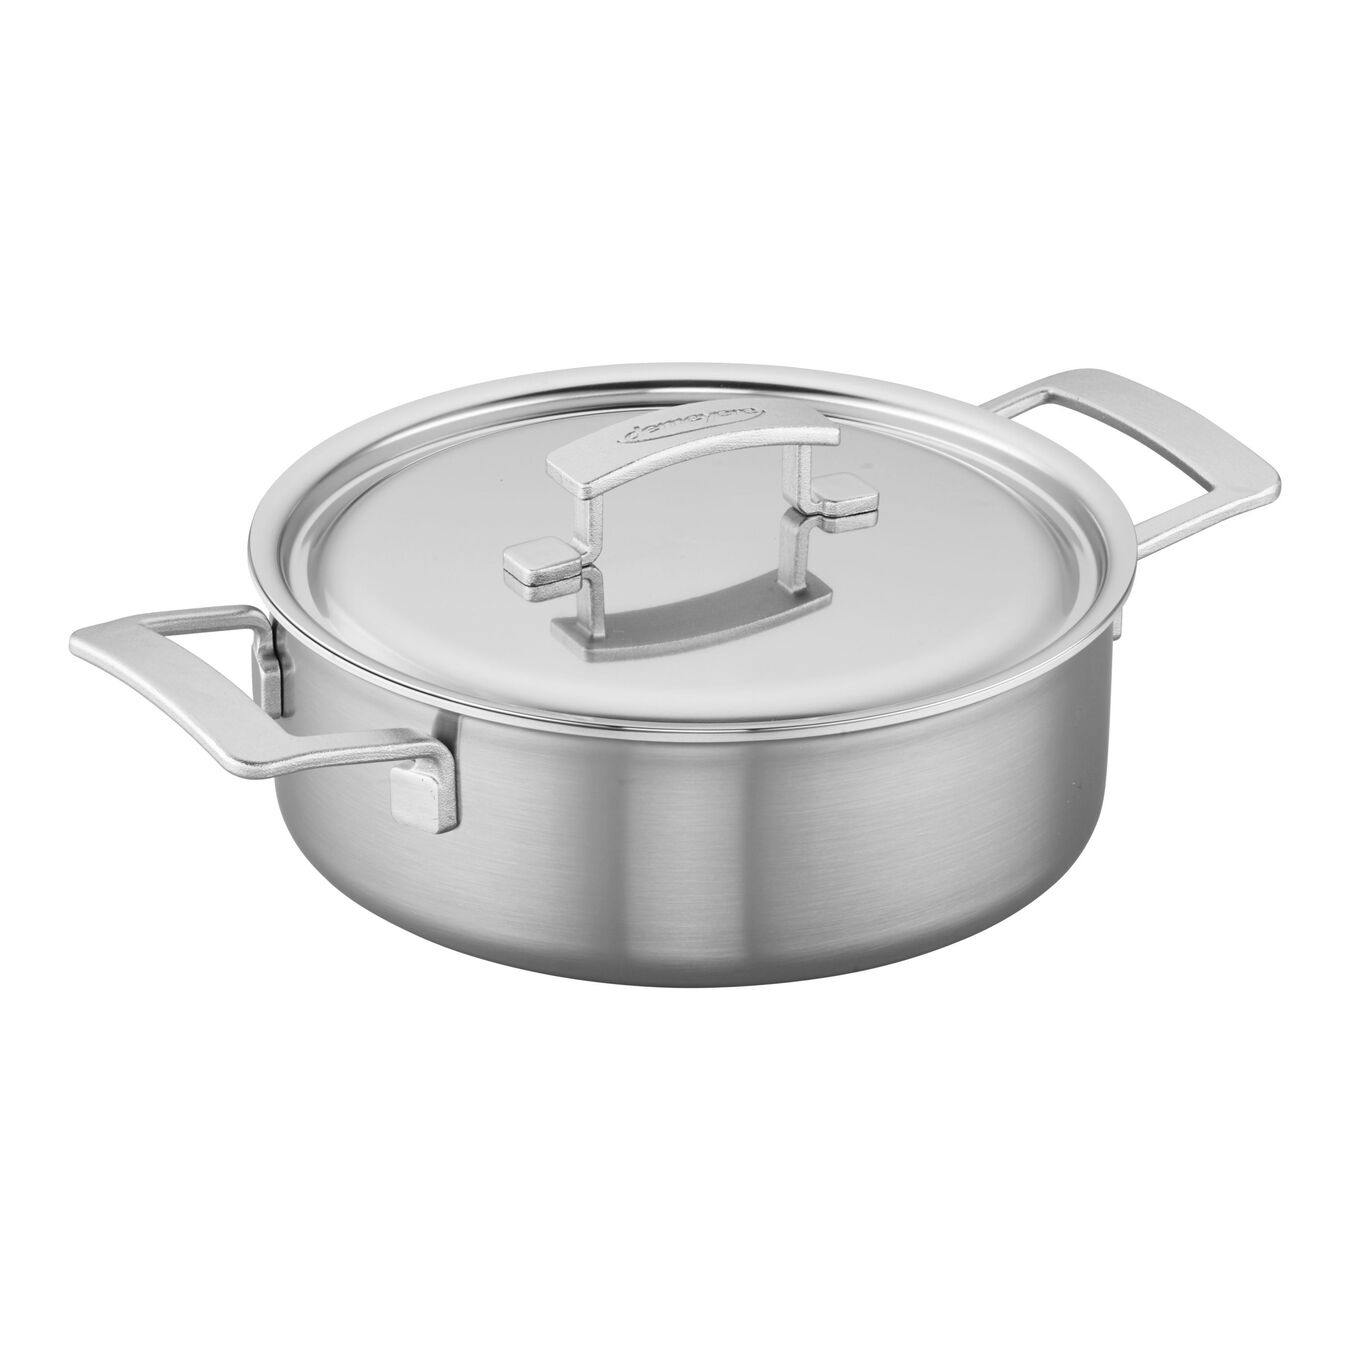 Demeyere Industry 4 QT Deep Saute Pan With Double Handle And Lid, 18/10 Stainless Steel